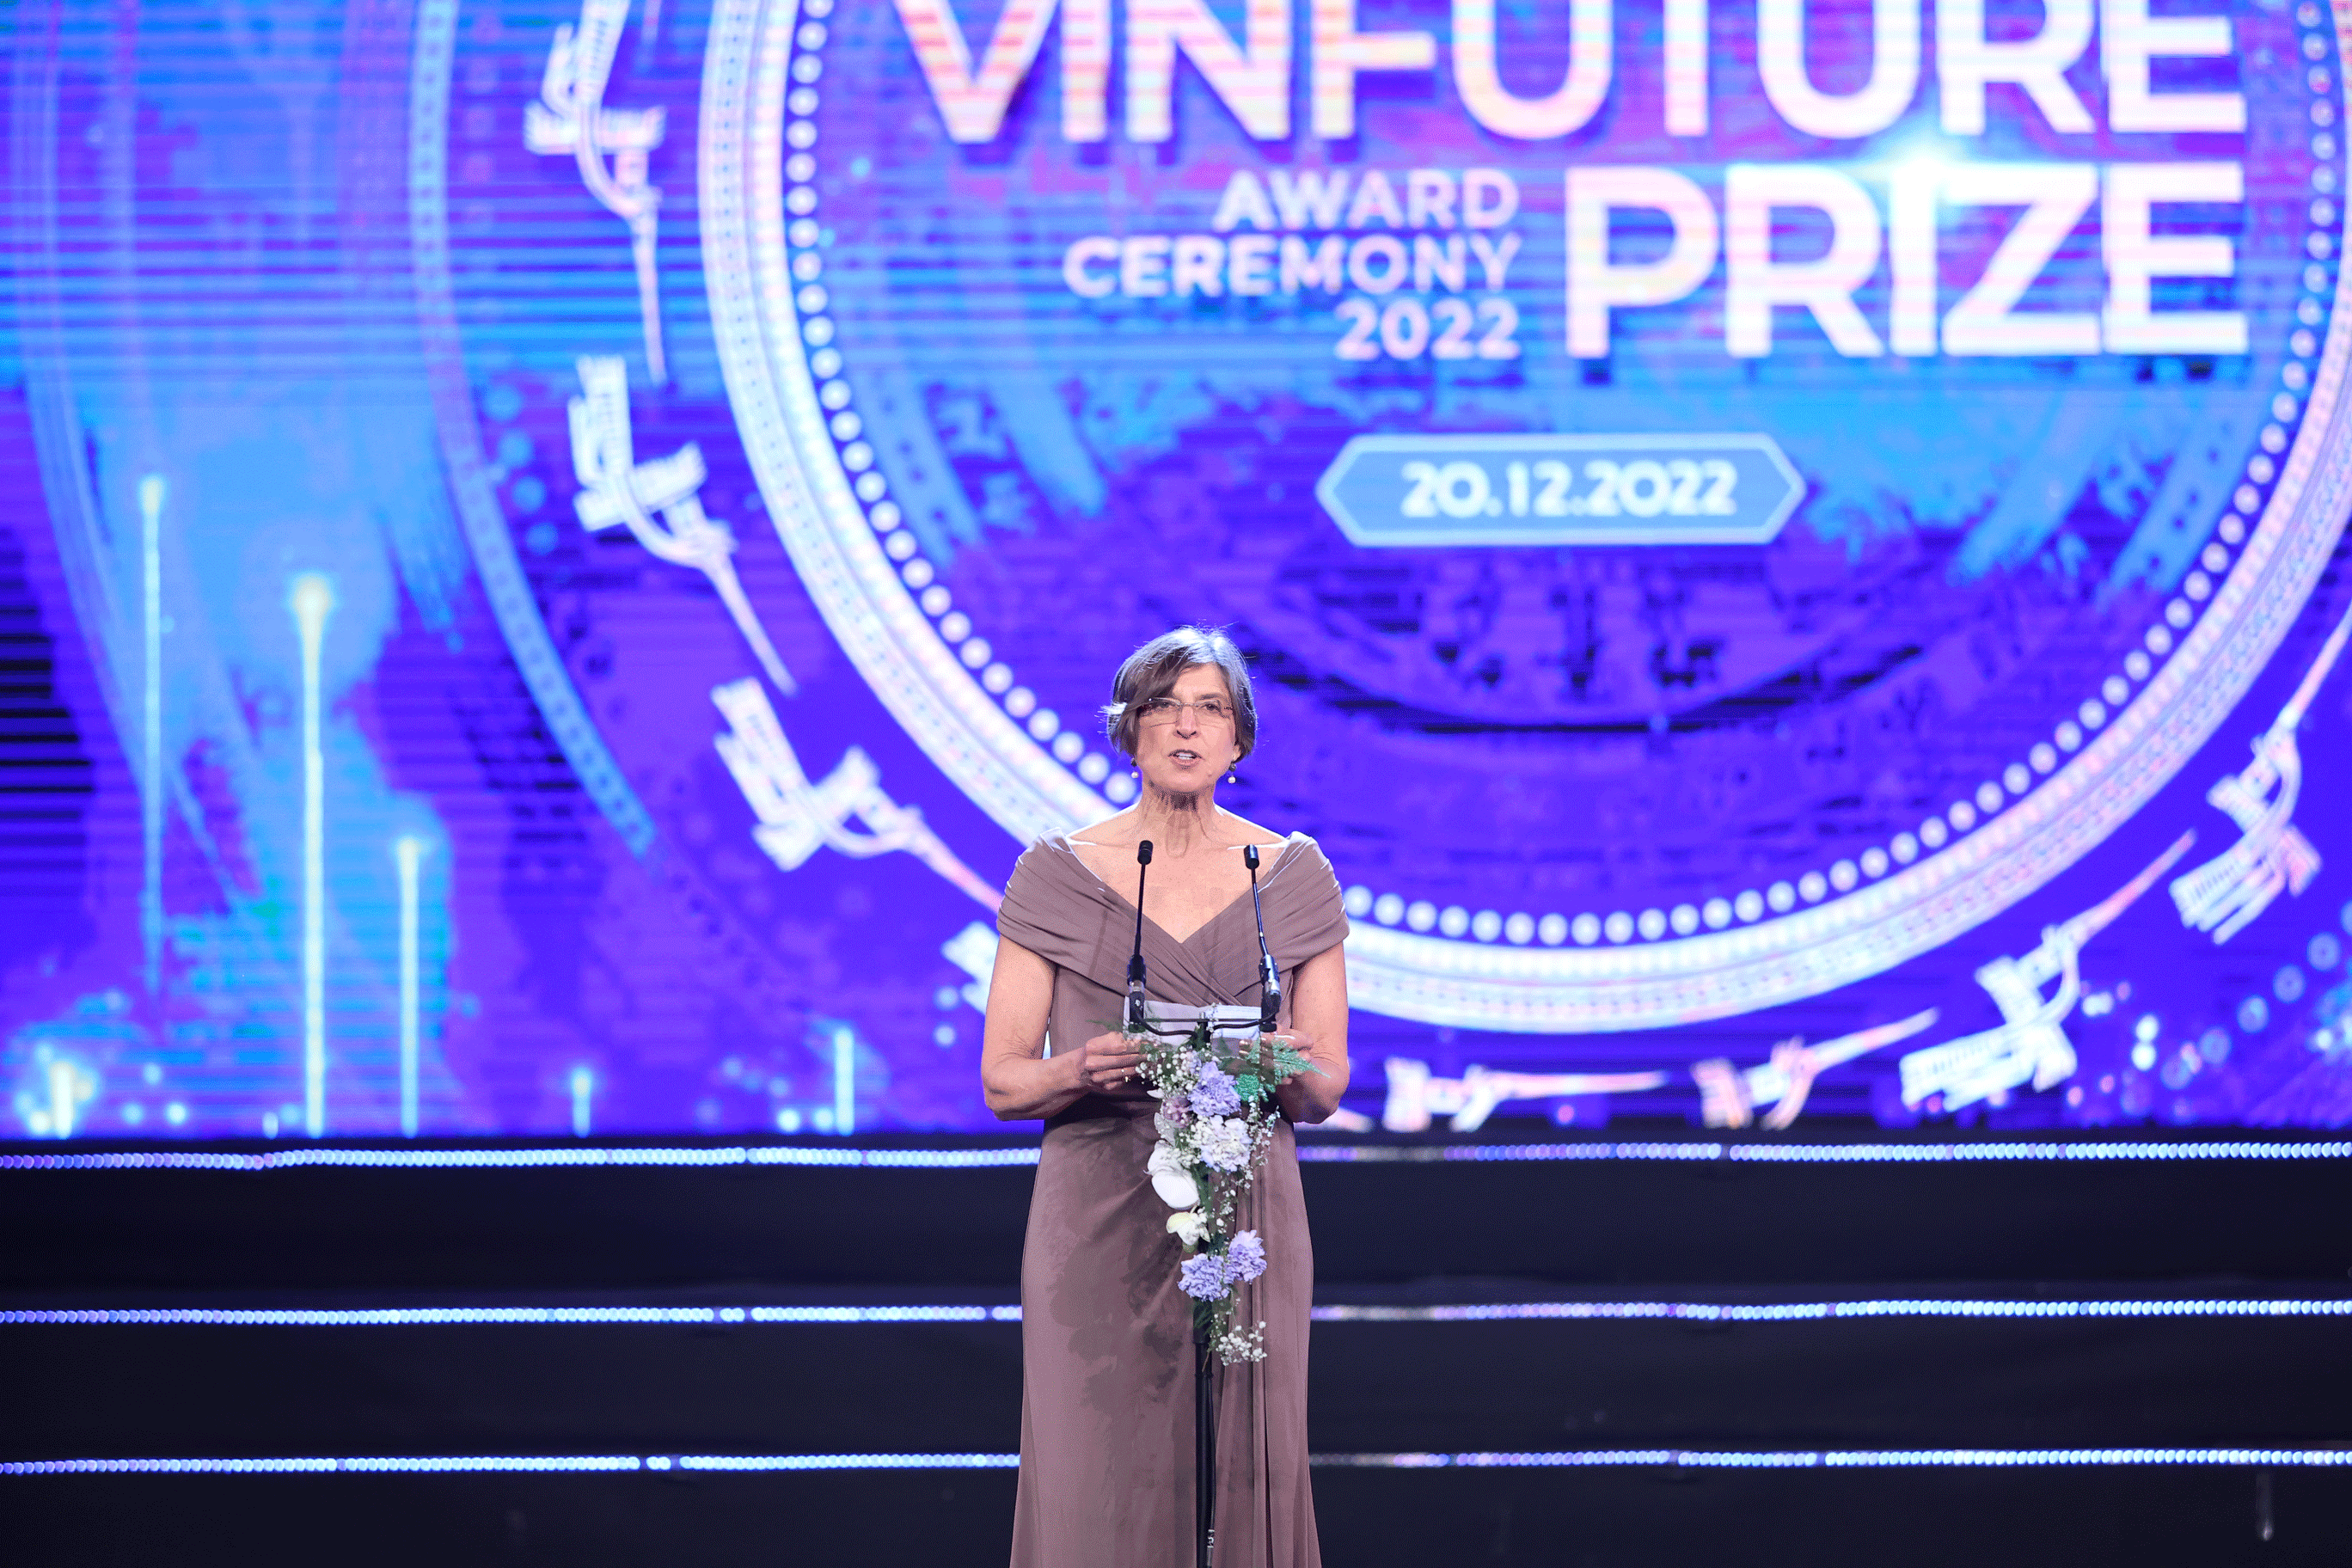 Pam Ronald stands at a podium at ceremony in Hanoi, Vietnam on December 20.